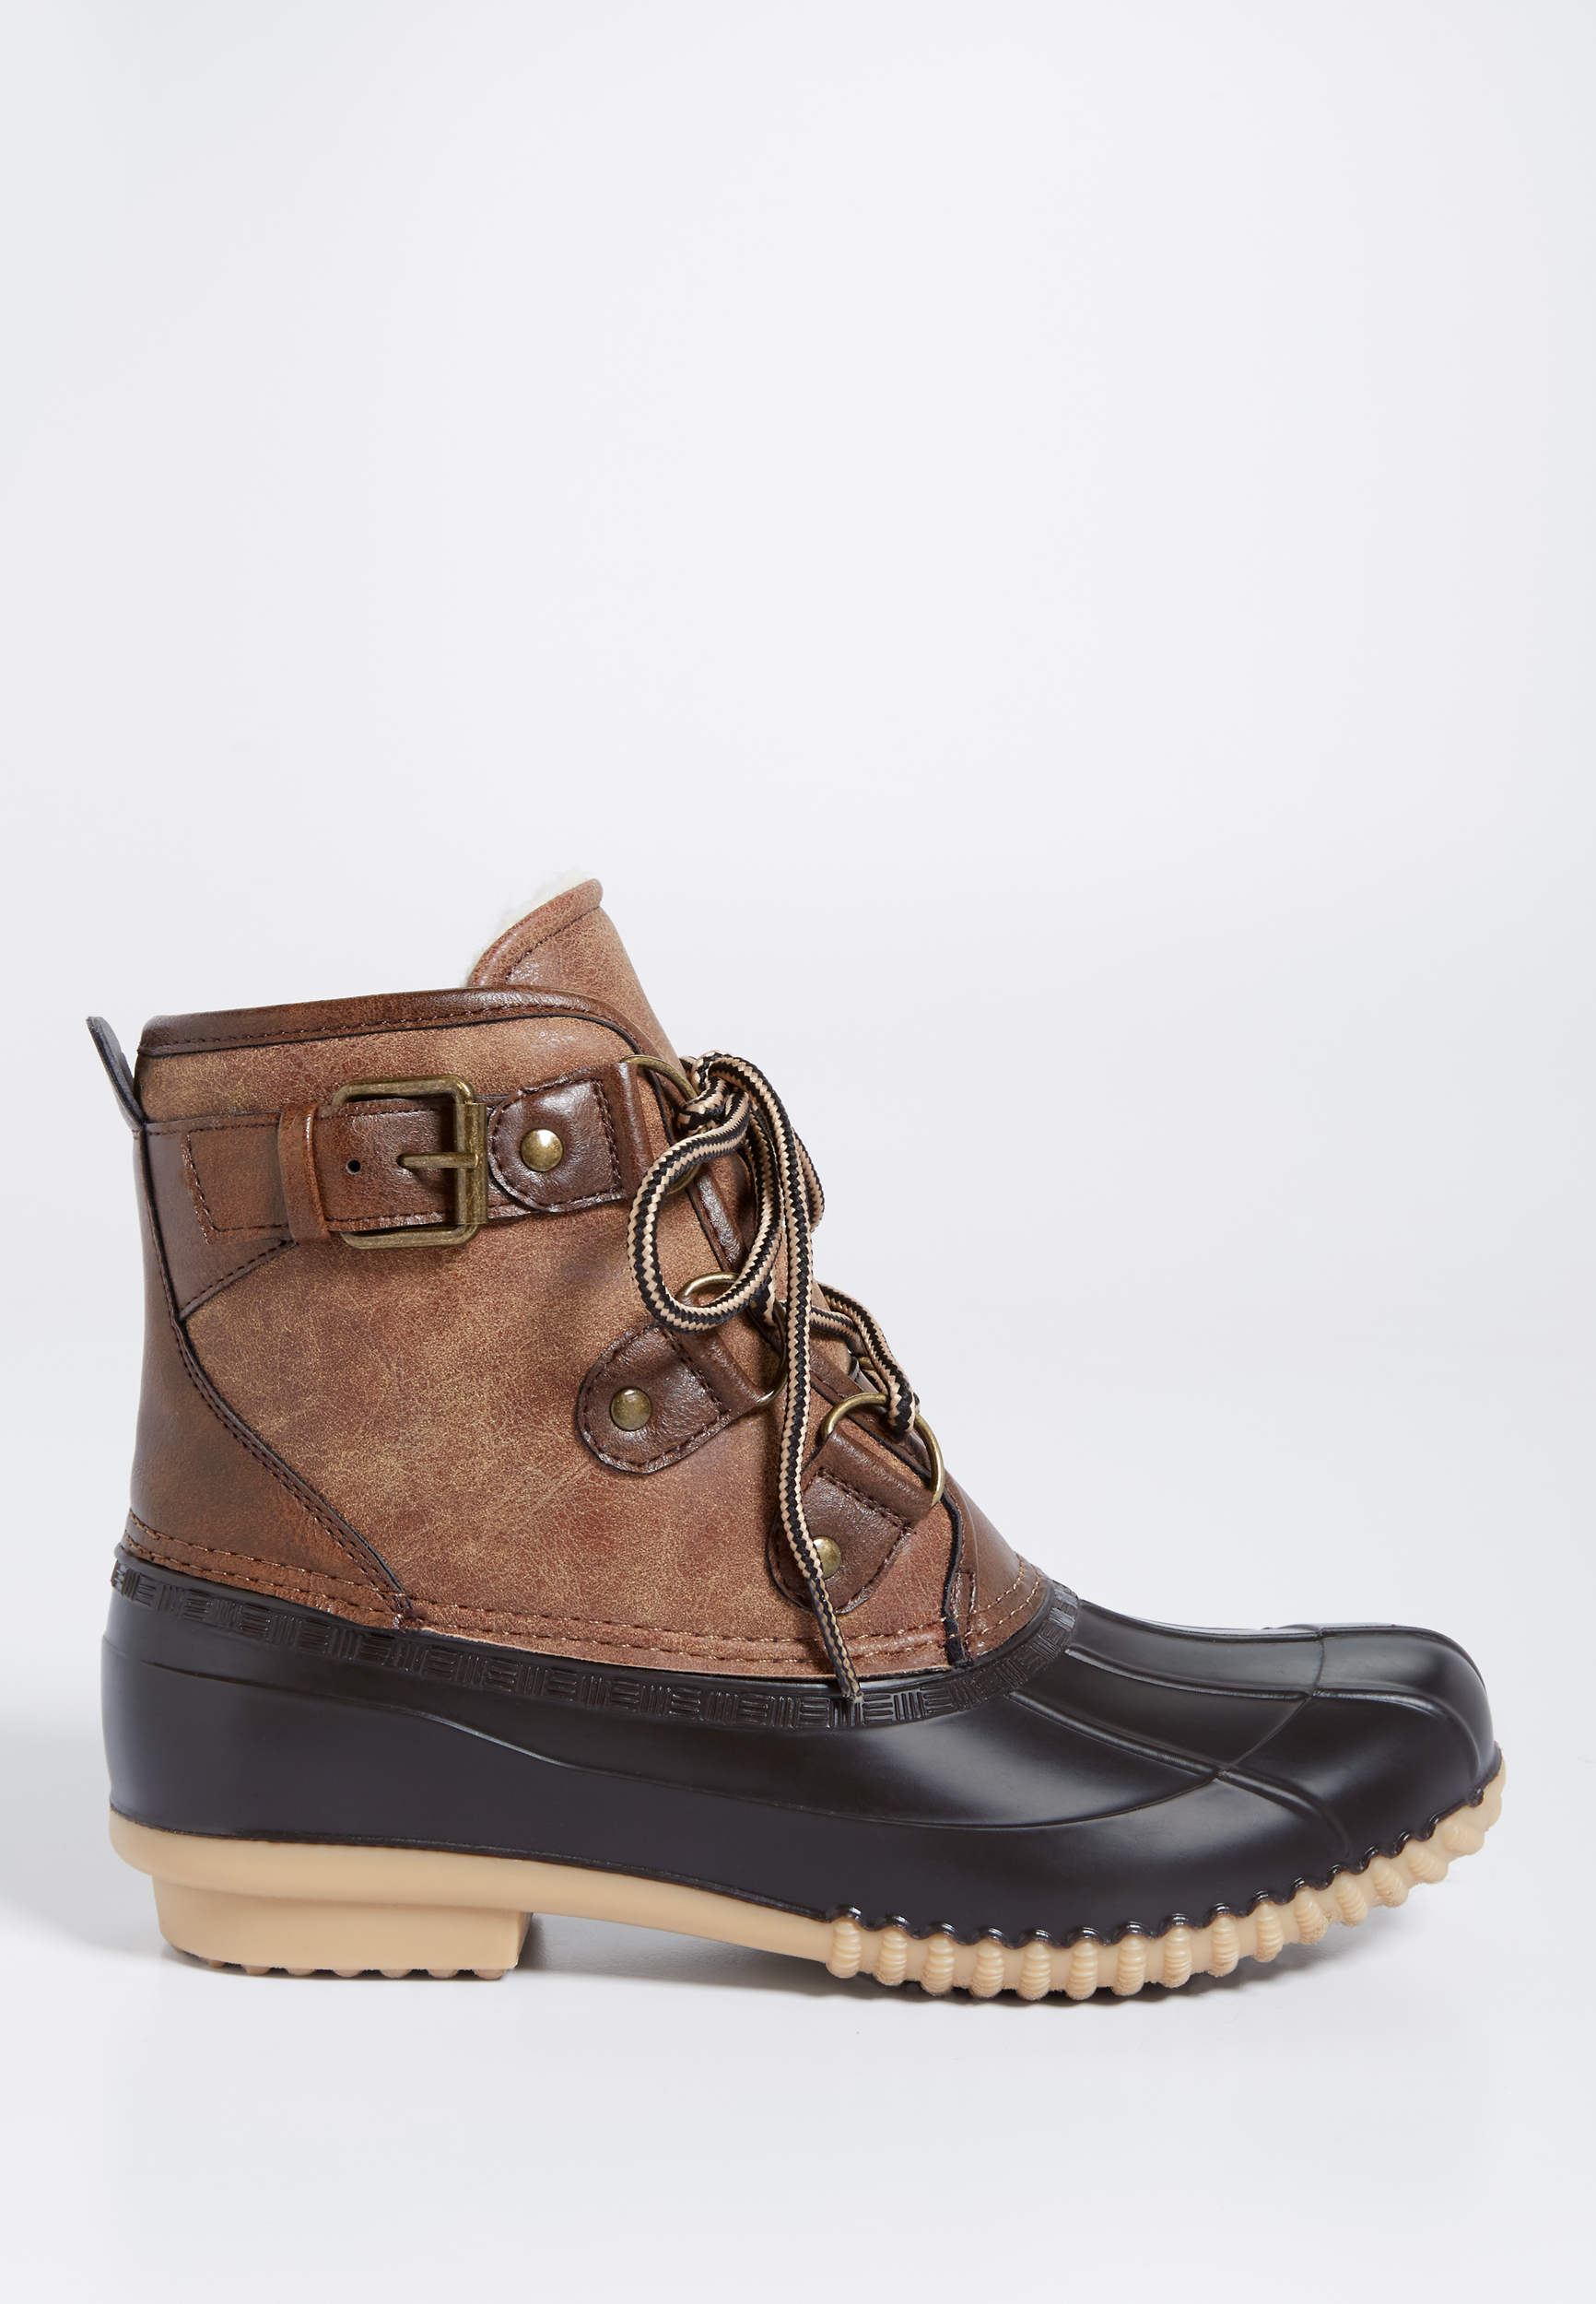 Westyn duck boot | maurices